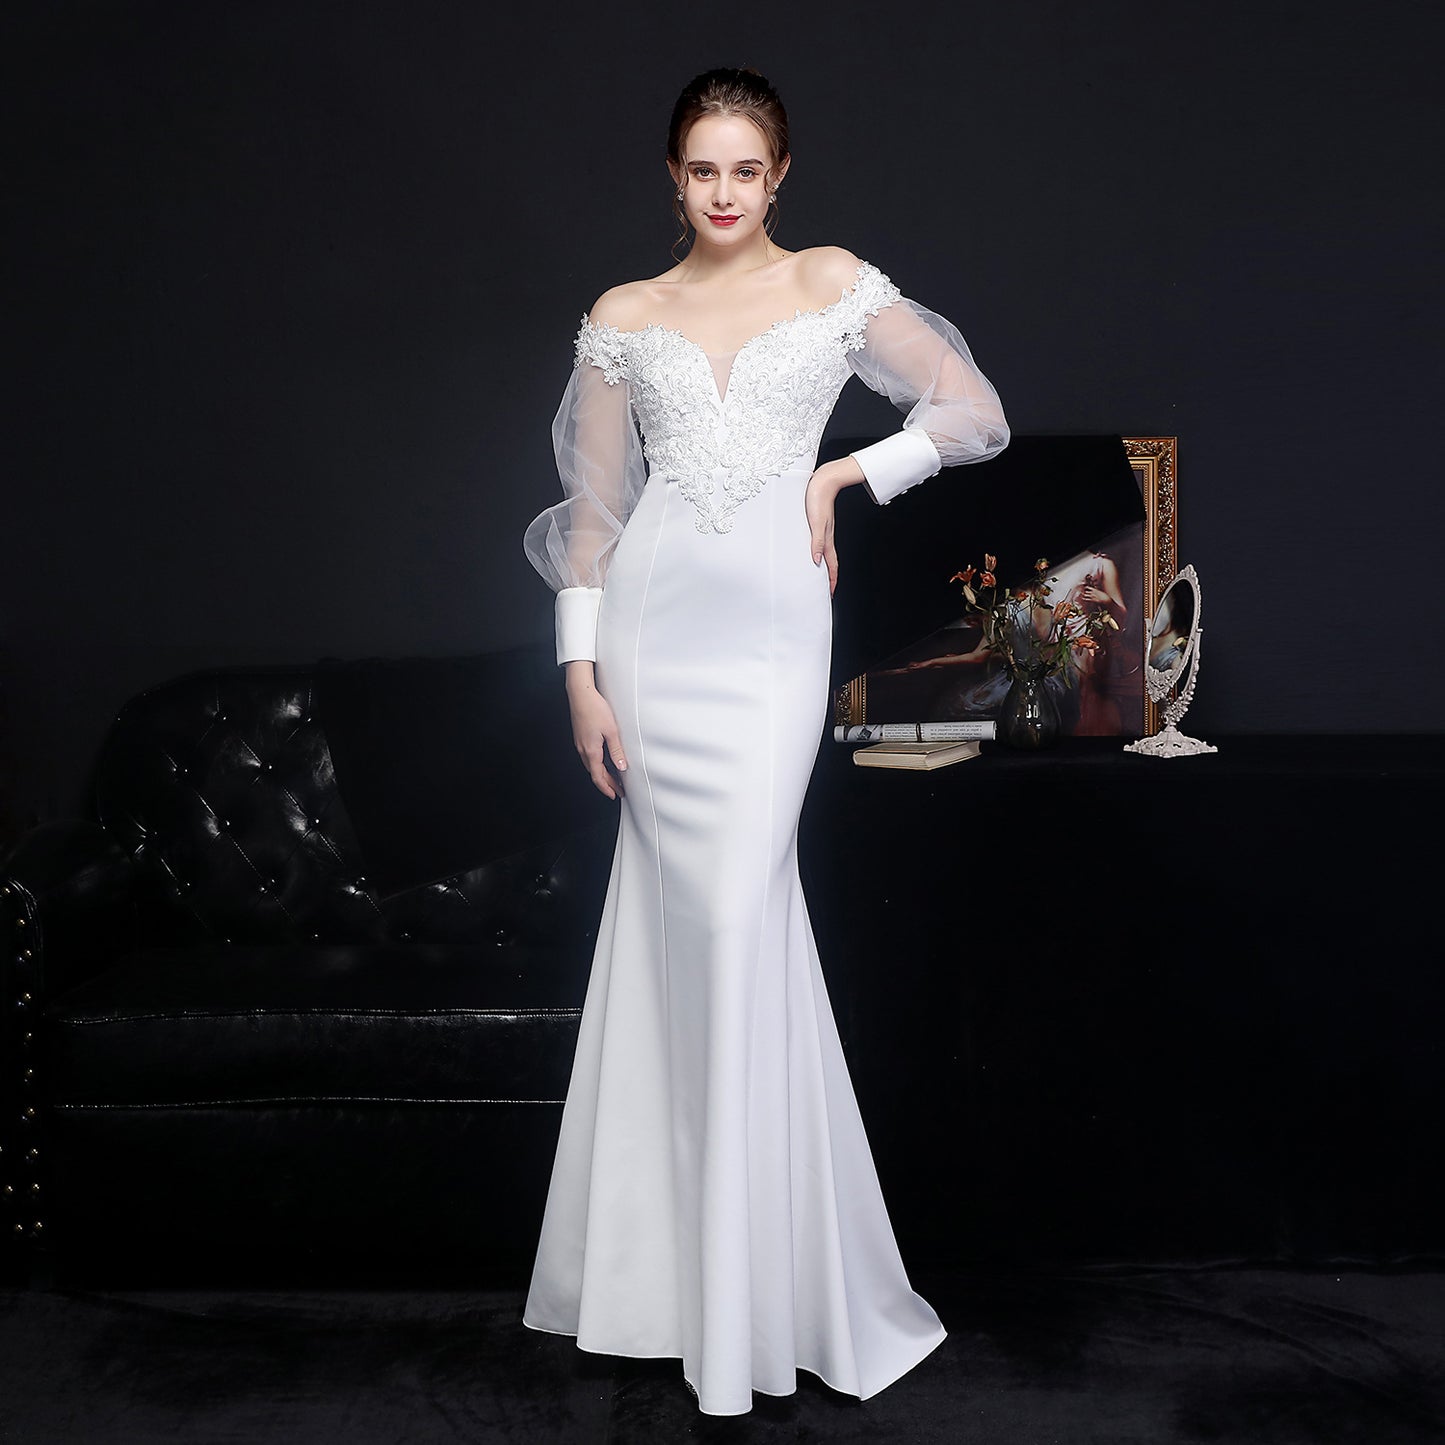 Full Craft Lace Hot Long-sleeved Evening Dress Tail Skirt